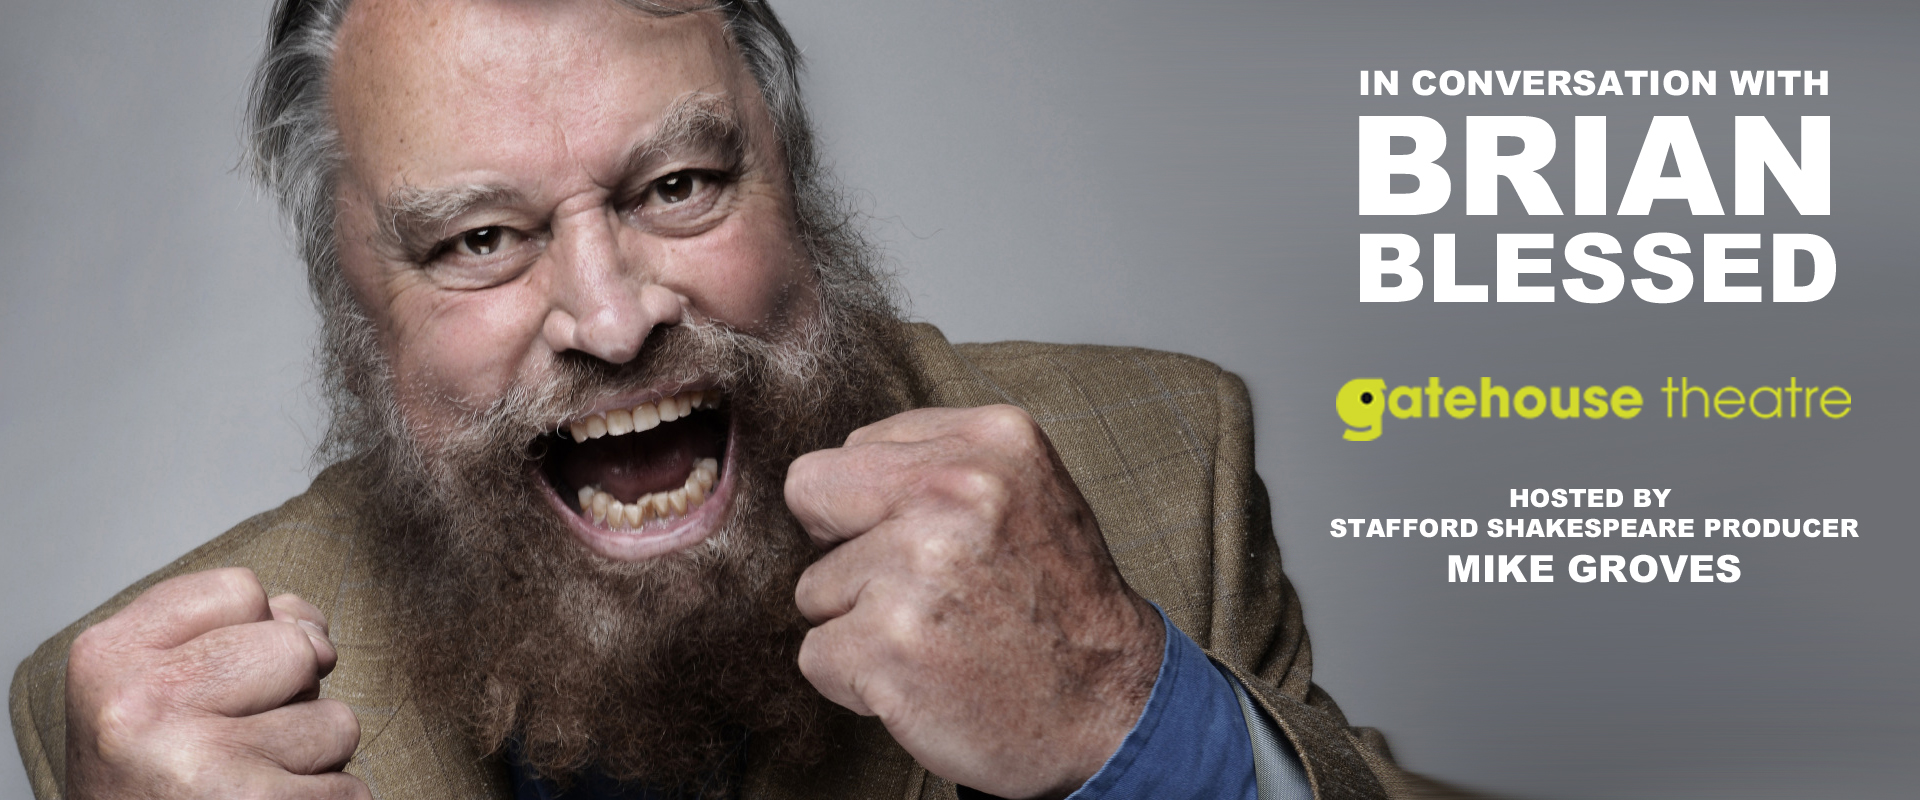 In Conversation with Brian Blessed